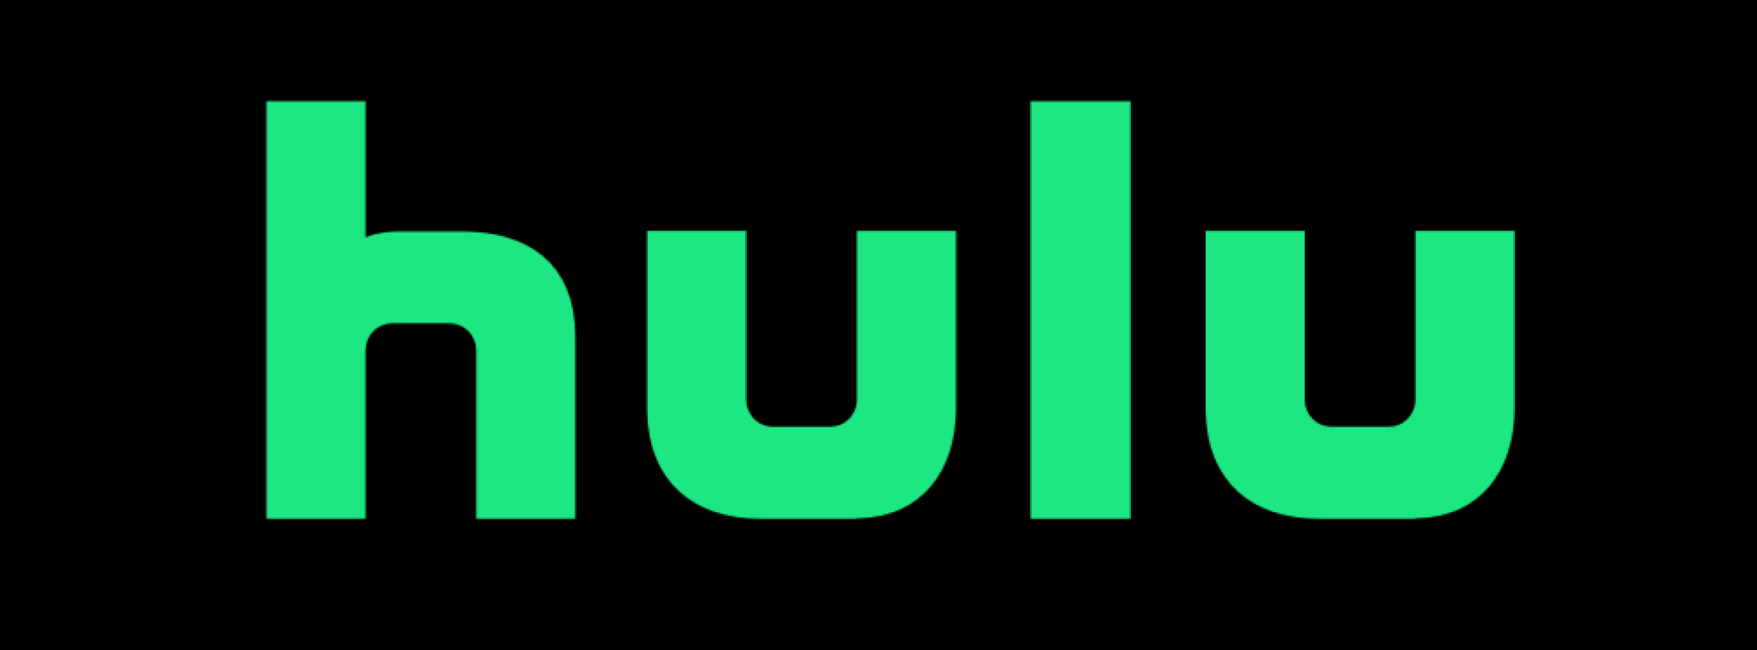 Hulu Says Advertising DTC Brands is Very Effective with Streaming